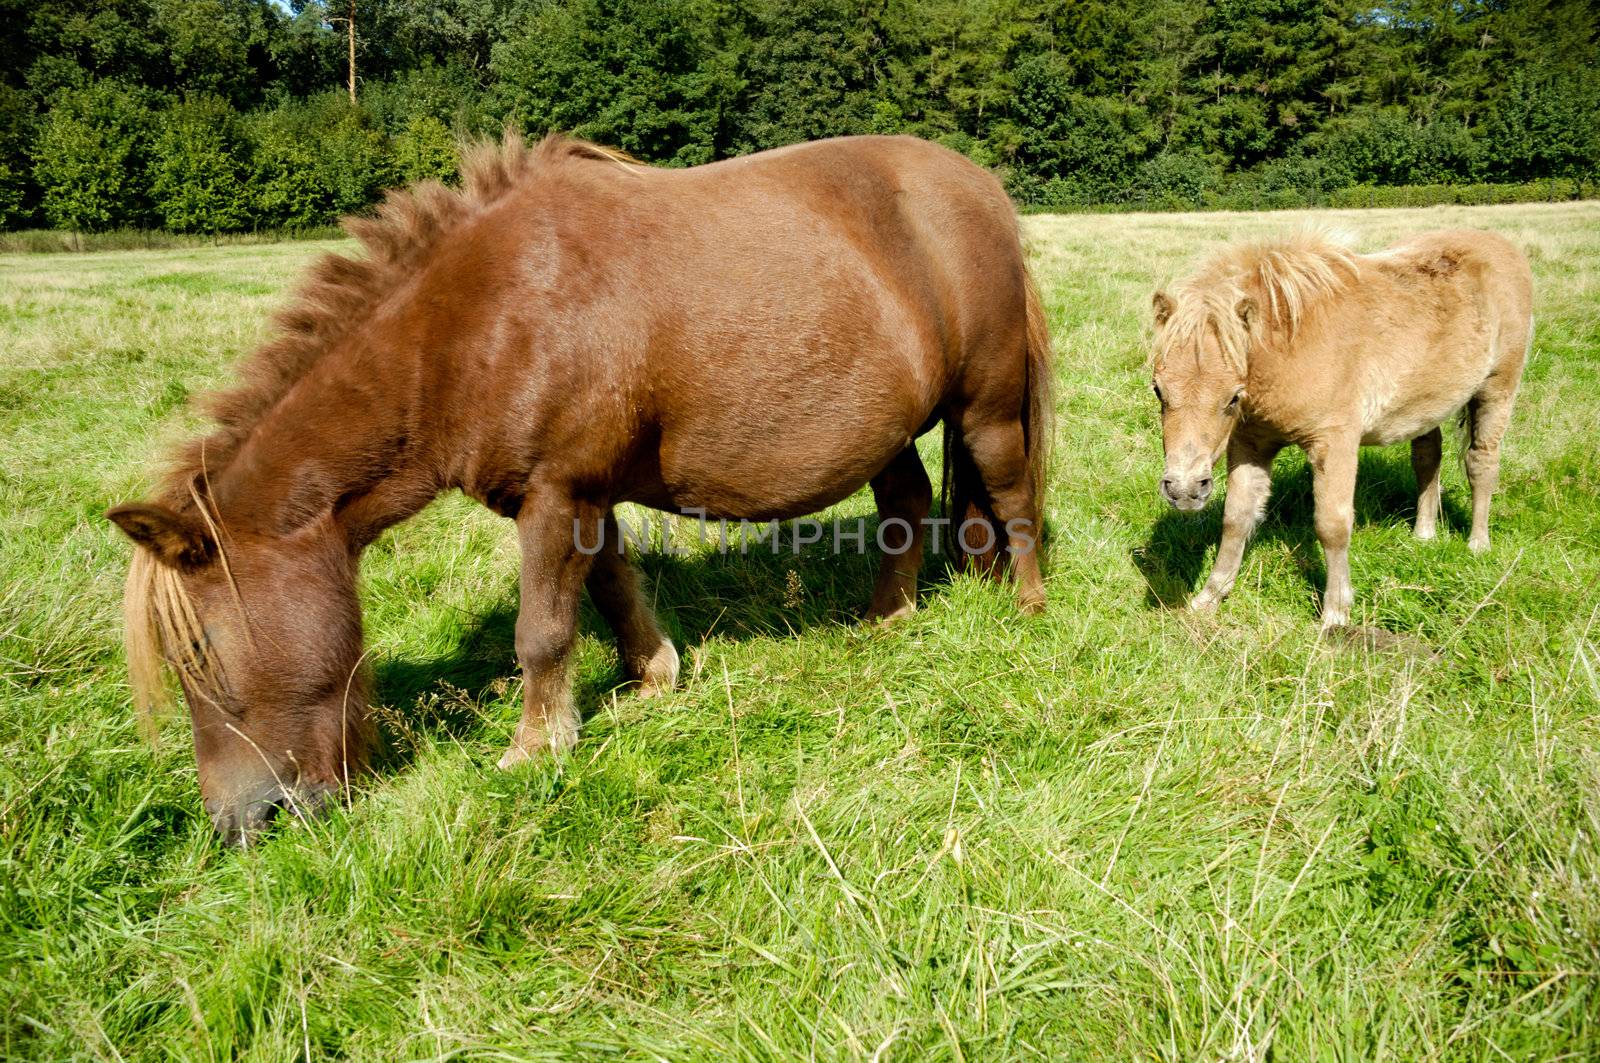 A sweet young horse with its mother eating green grass field.